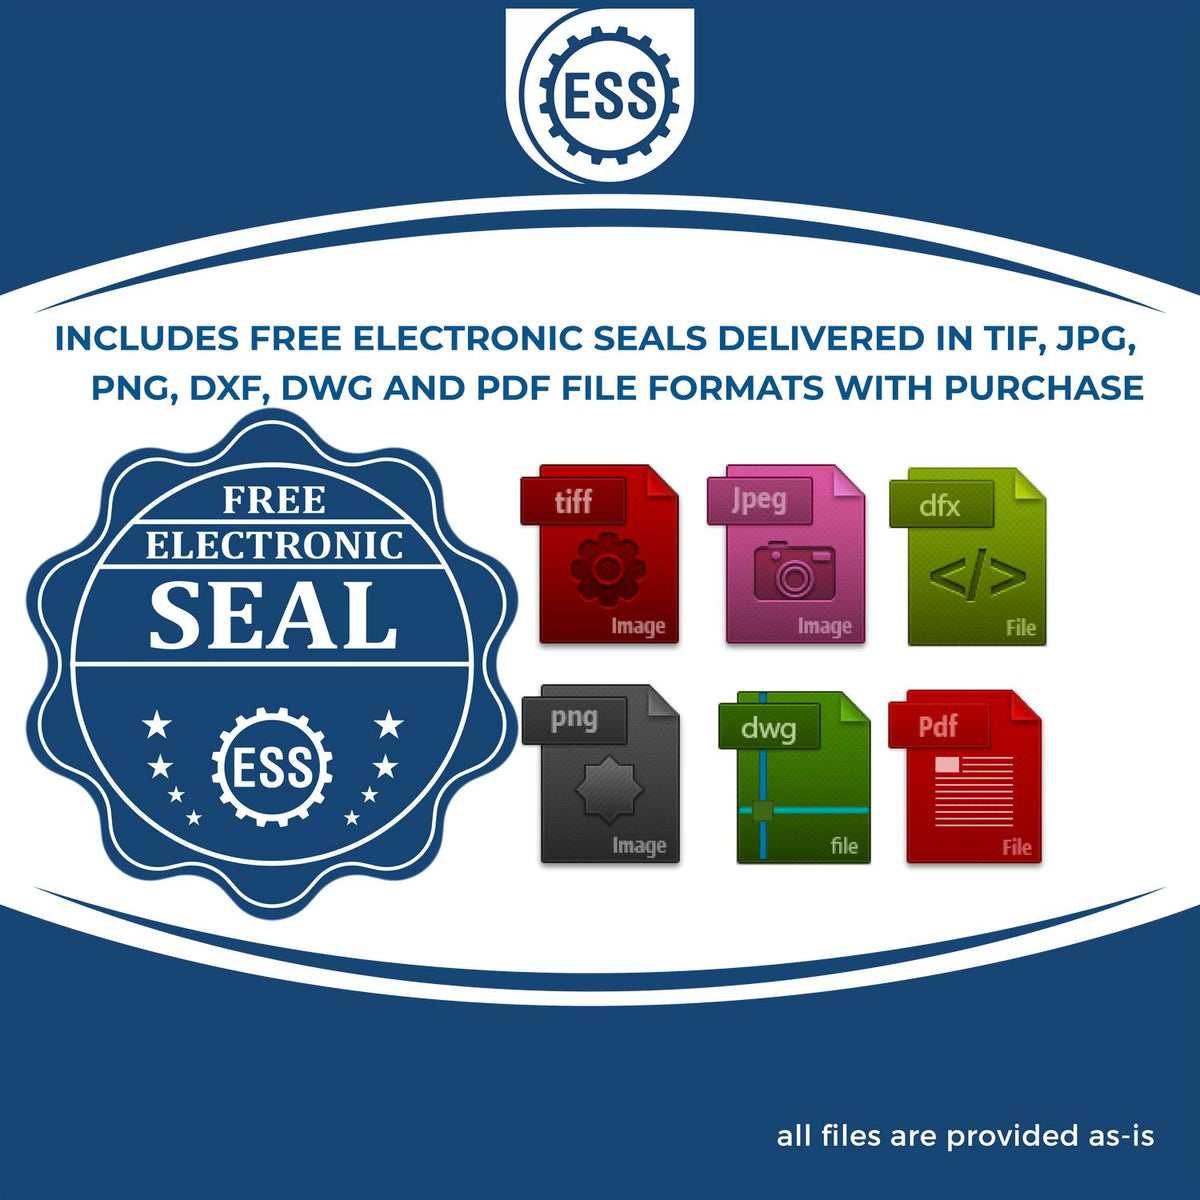 An infographic for the free electronic seal for the Heavy Duty Cast Iron Arizona Engineer Seal Embosser illustrating the different file type icons such as DXF, DWG, TIF, JPG and PNG.